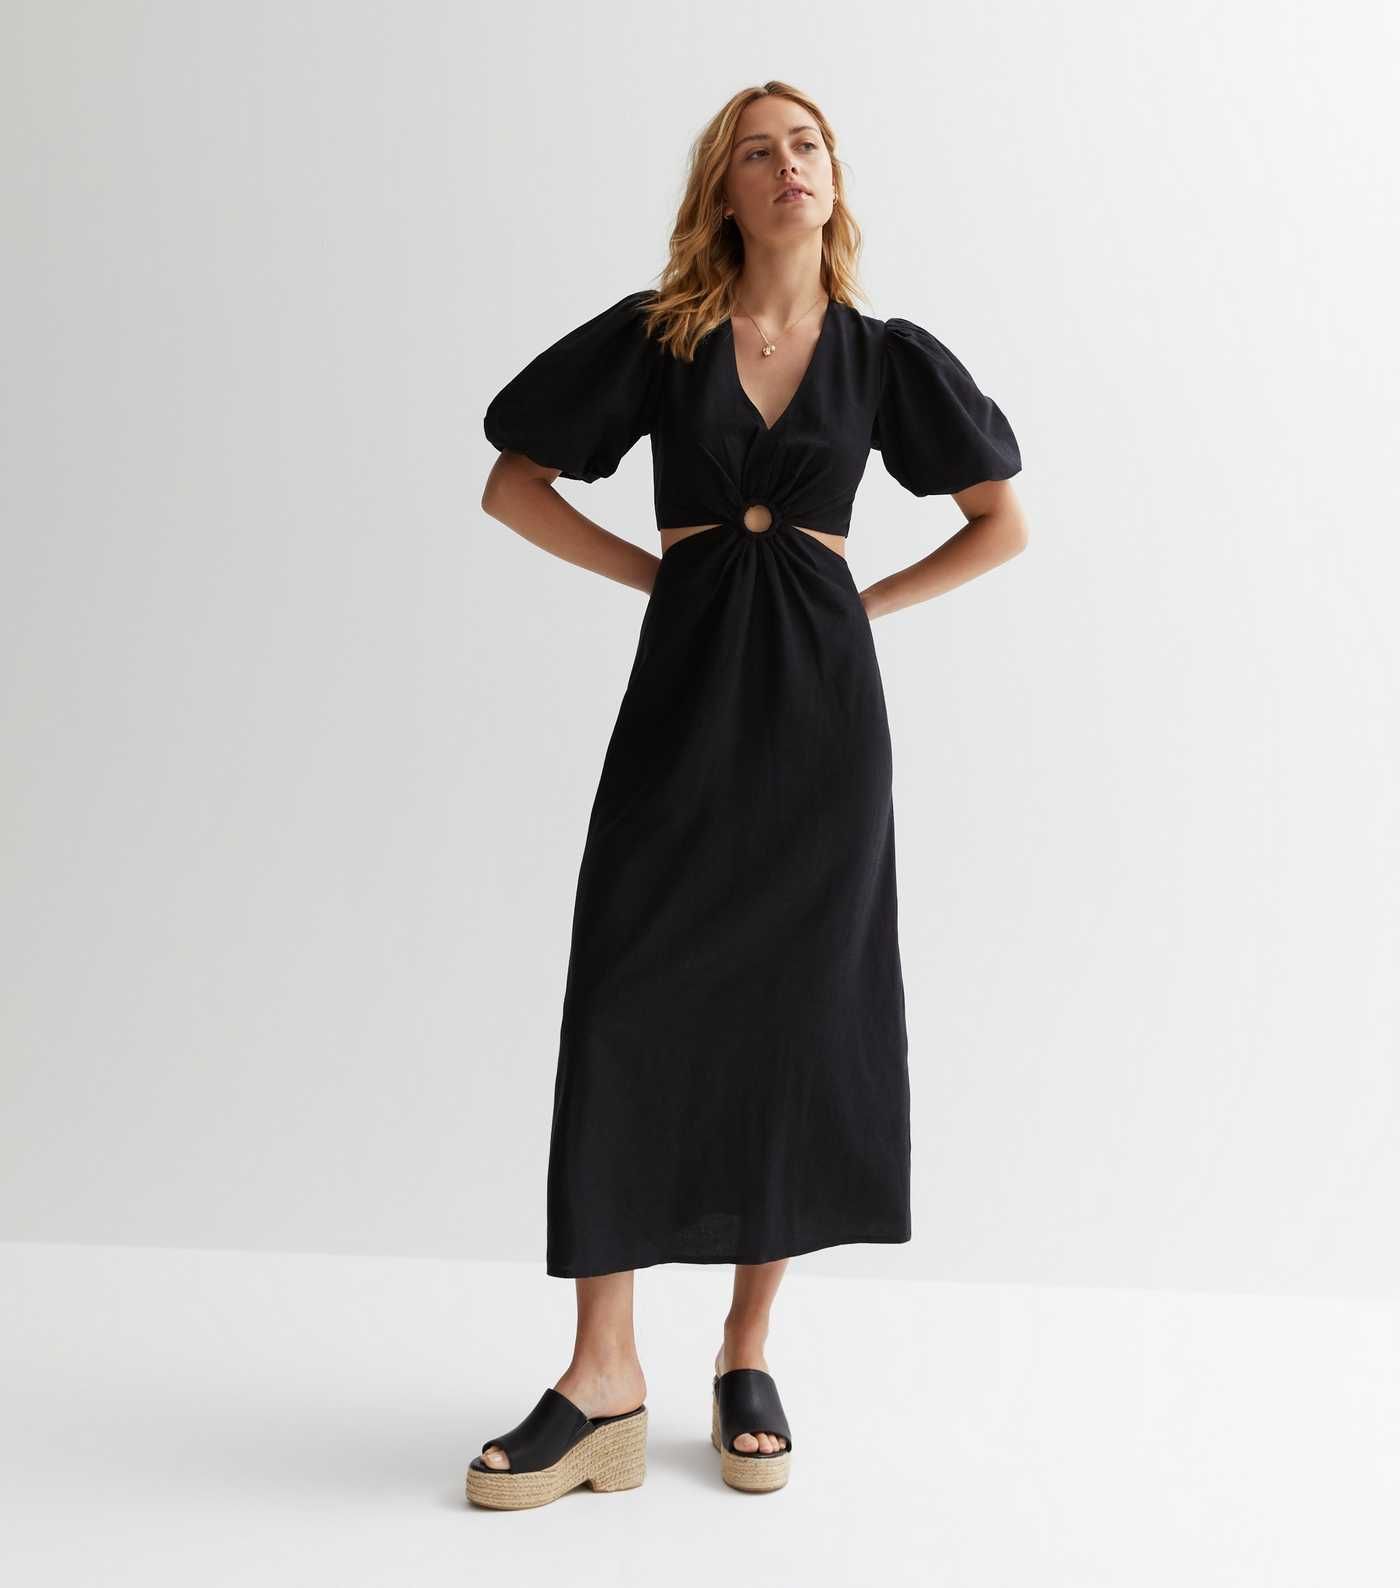 Black Cut Out Short Sleeve Midaxi Dress
						
						Add to Saved Items
						Remove from Saved I... | New Look (UK)